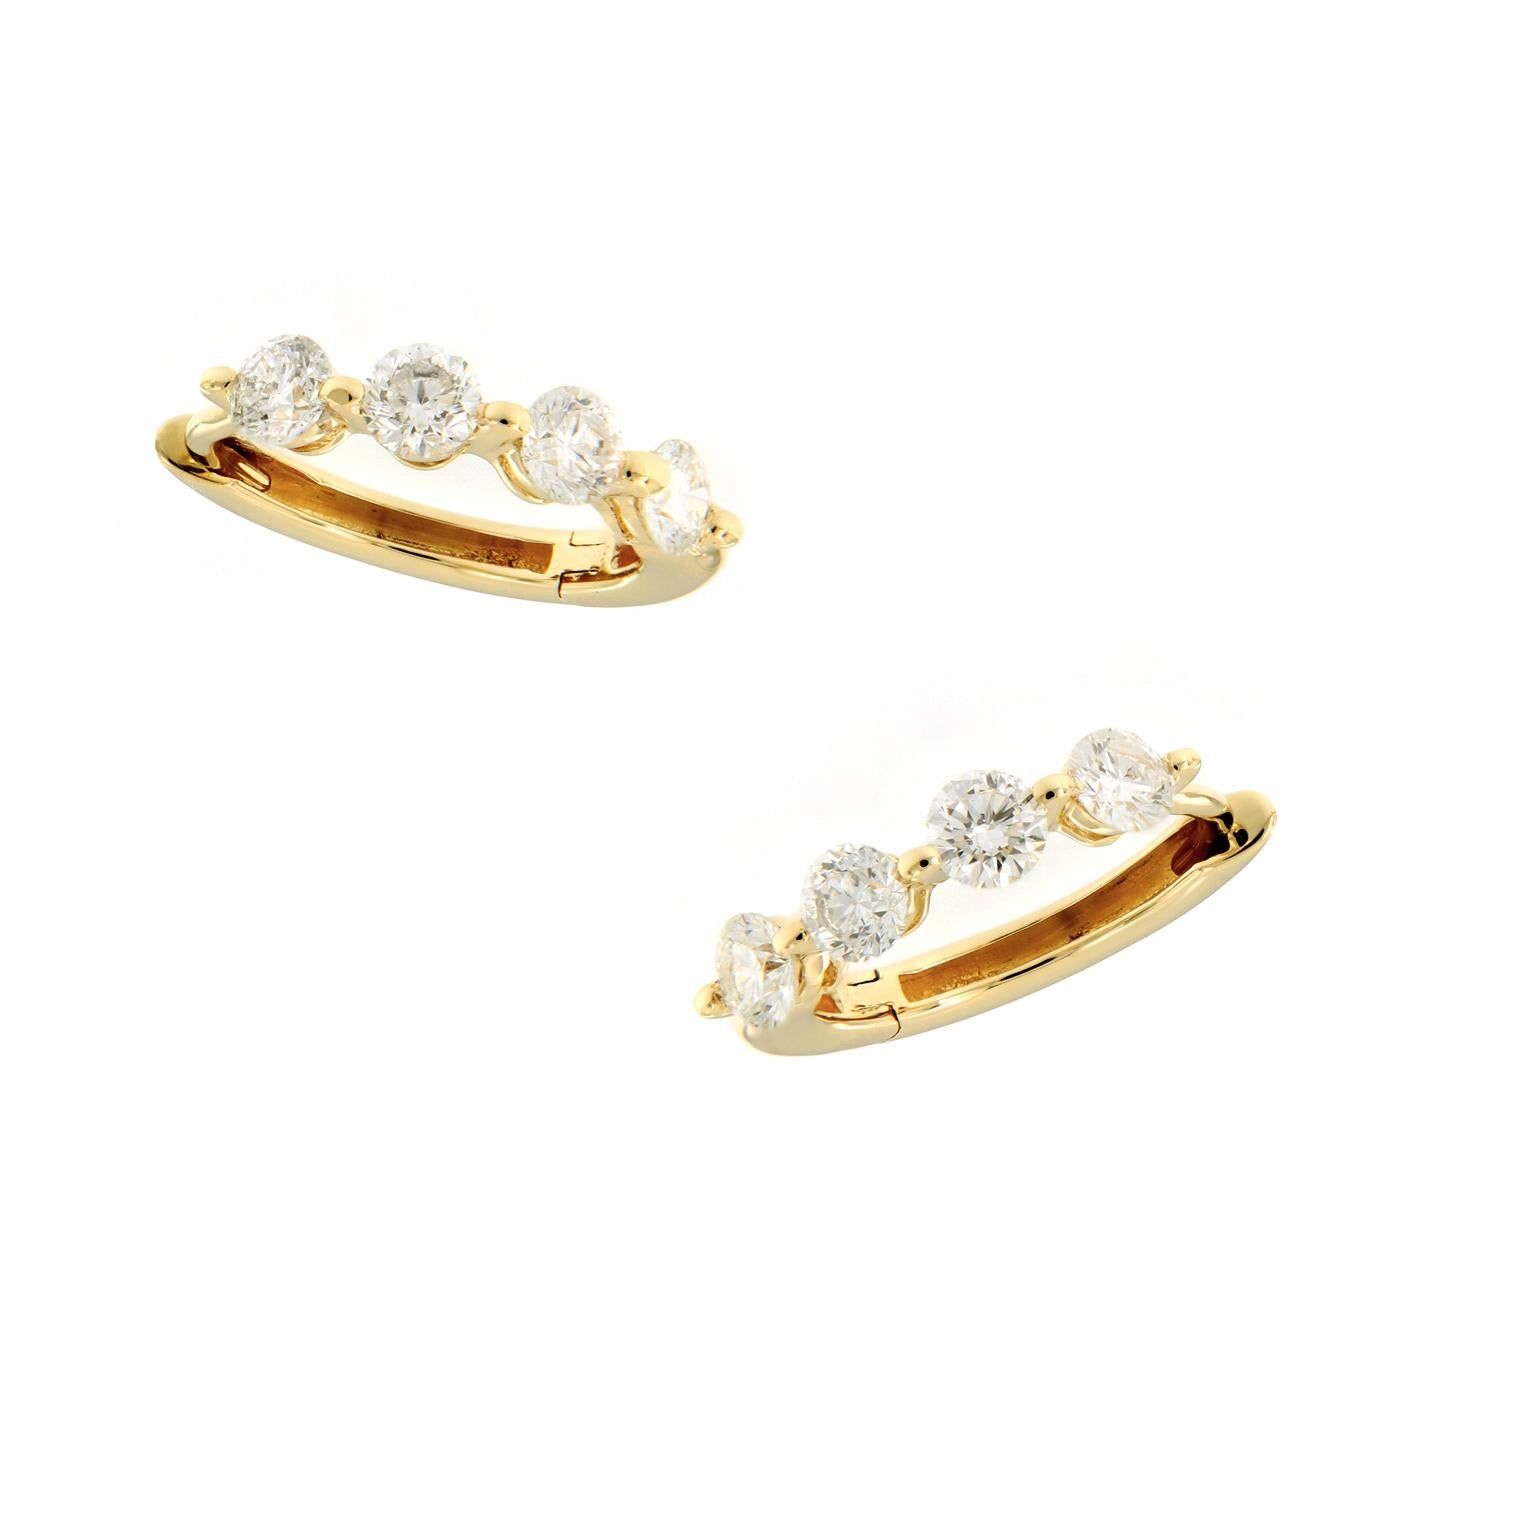 Lovely diamond huggy earrings perfect for every day & will be the most comfortable earrings you own! Crafted in 18k yellow gold, each earring has four round brilliant cut diamonds set in one shared prong. Can be worn diamonds forward or solid gold